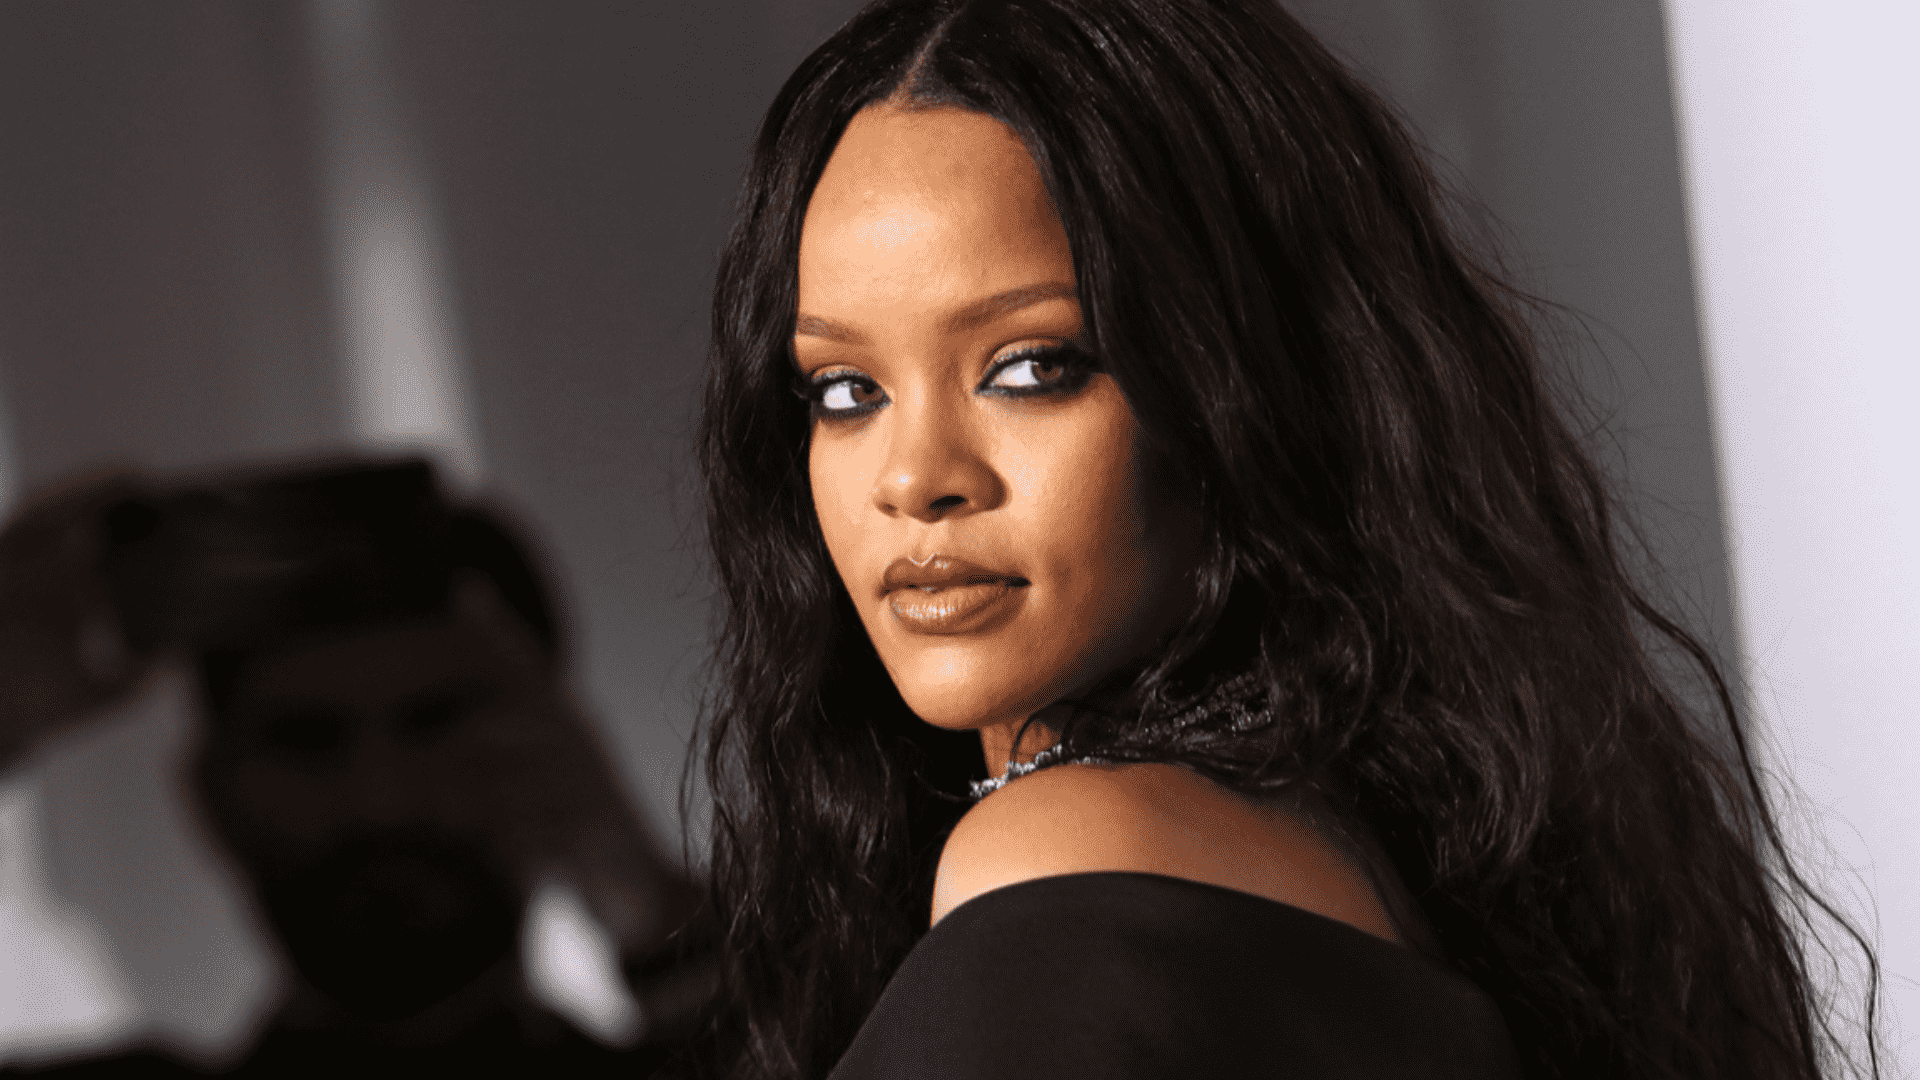 Rihanna’s Ambitious Plans For Upcoming Album: ‘It’s Going To Be Amazing!